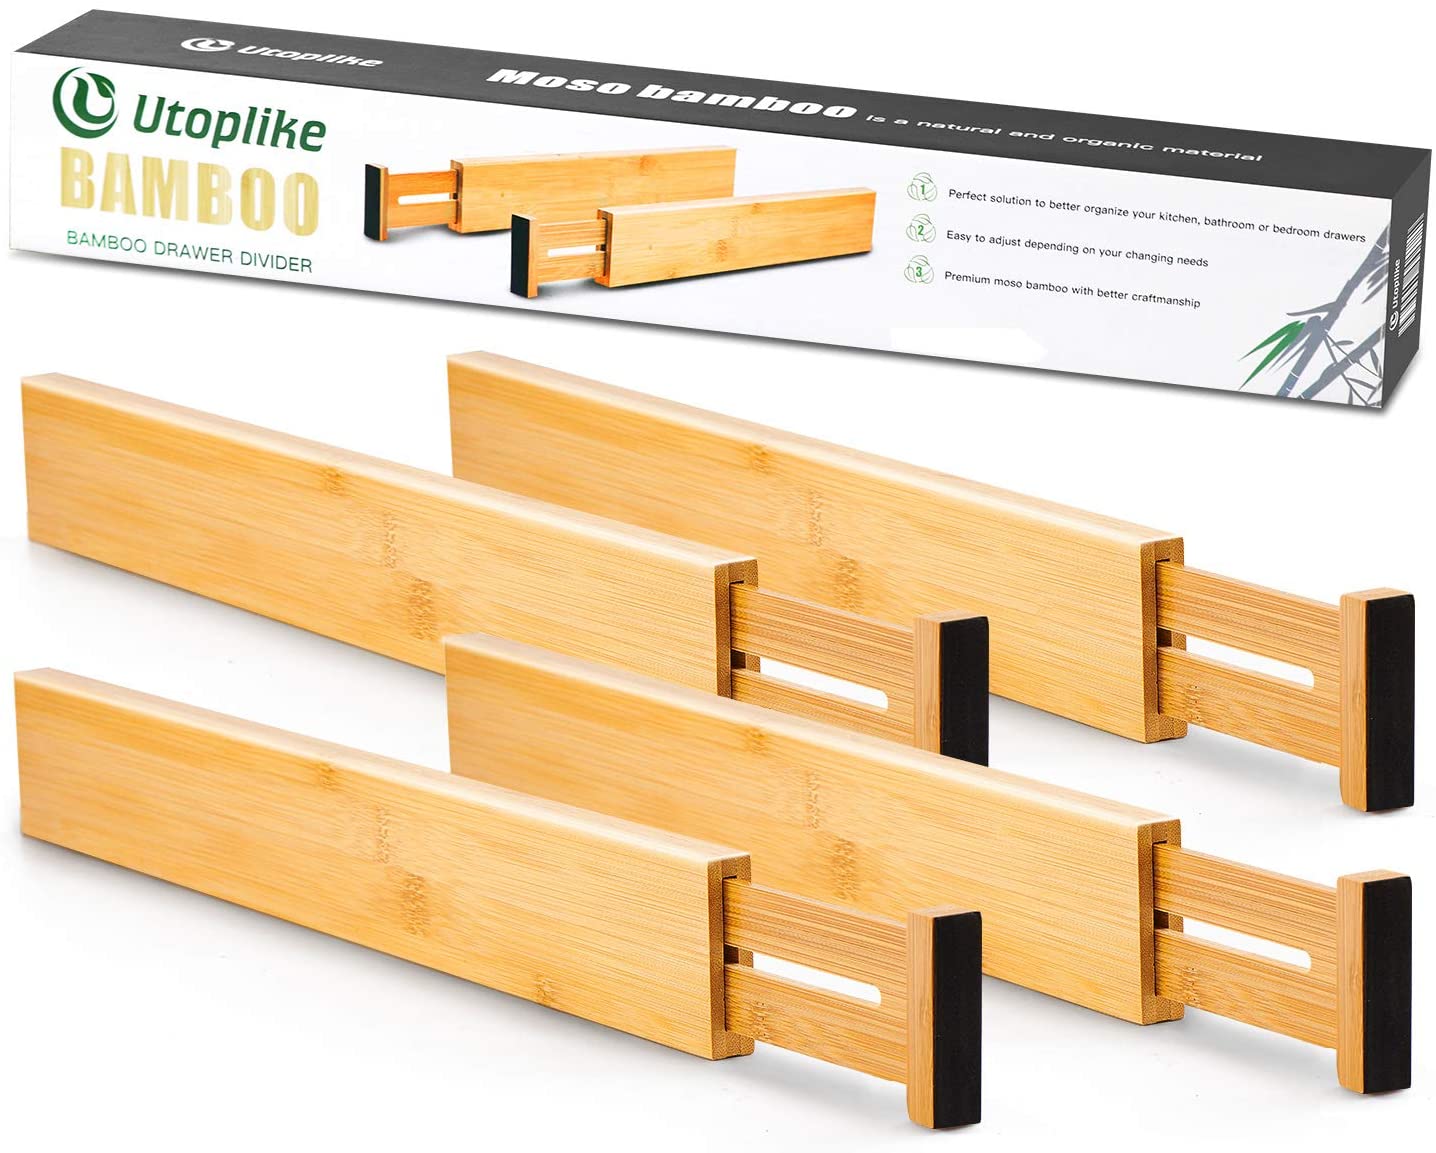 Utoplike 4 Pack Bamboo Kitchen Drawer Dividers - e4cents